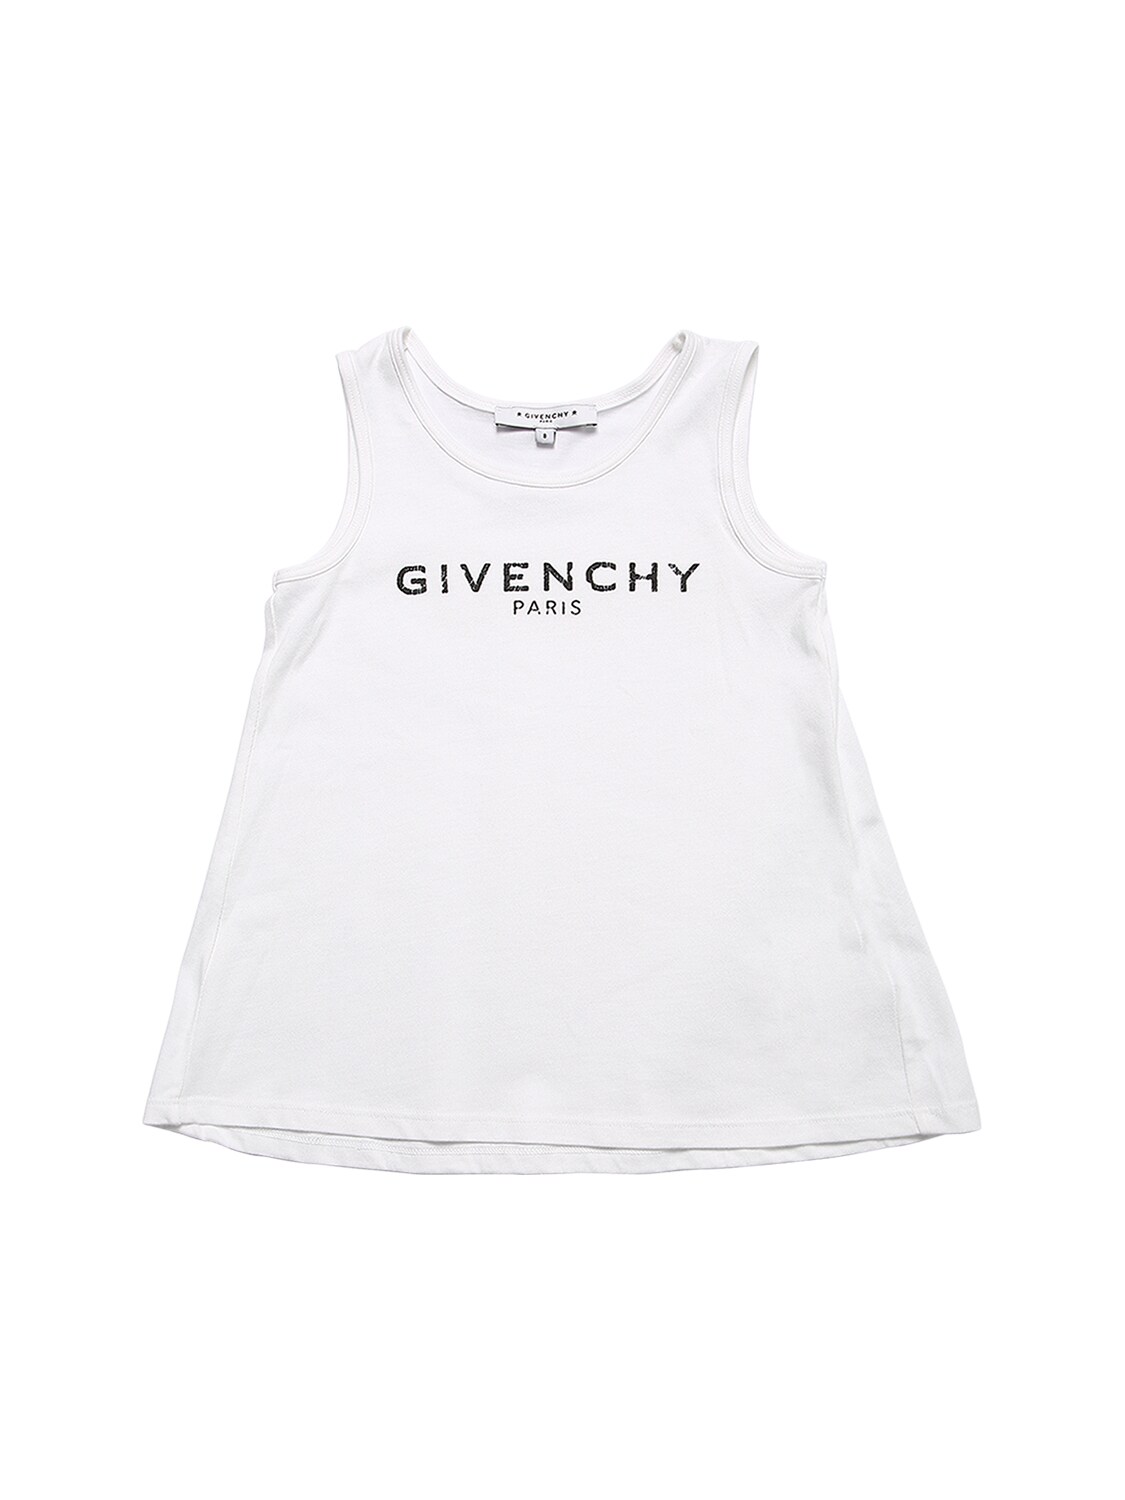 Givenchy Kids' Logo Printed Cotton Jersey Tank Top In White